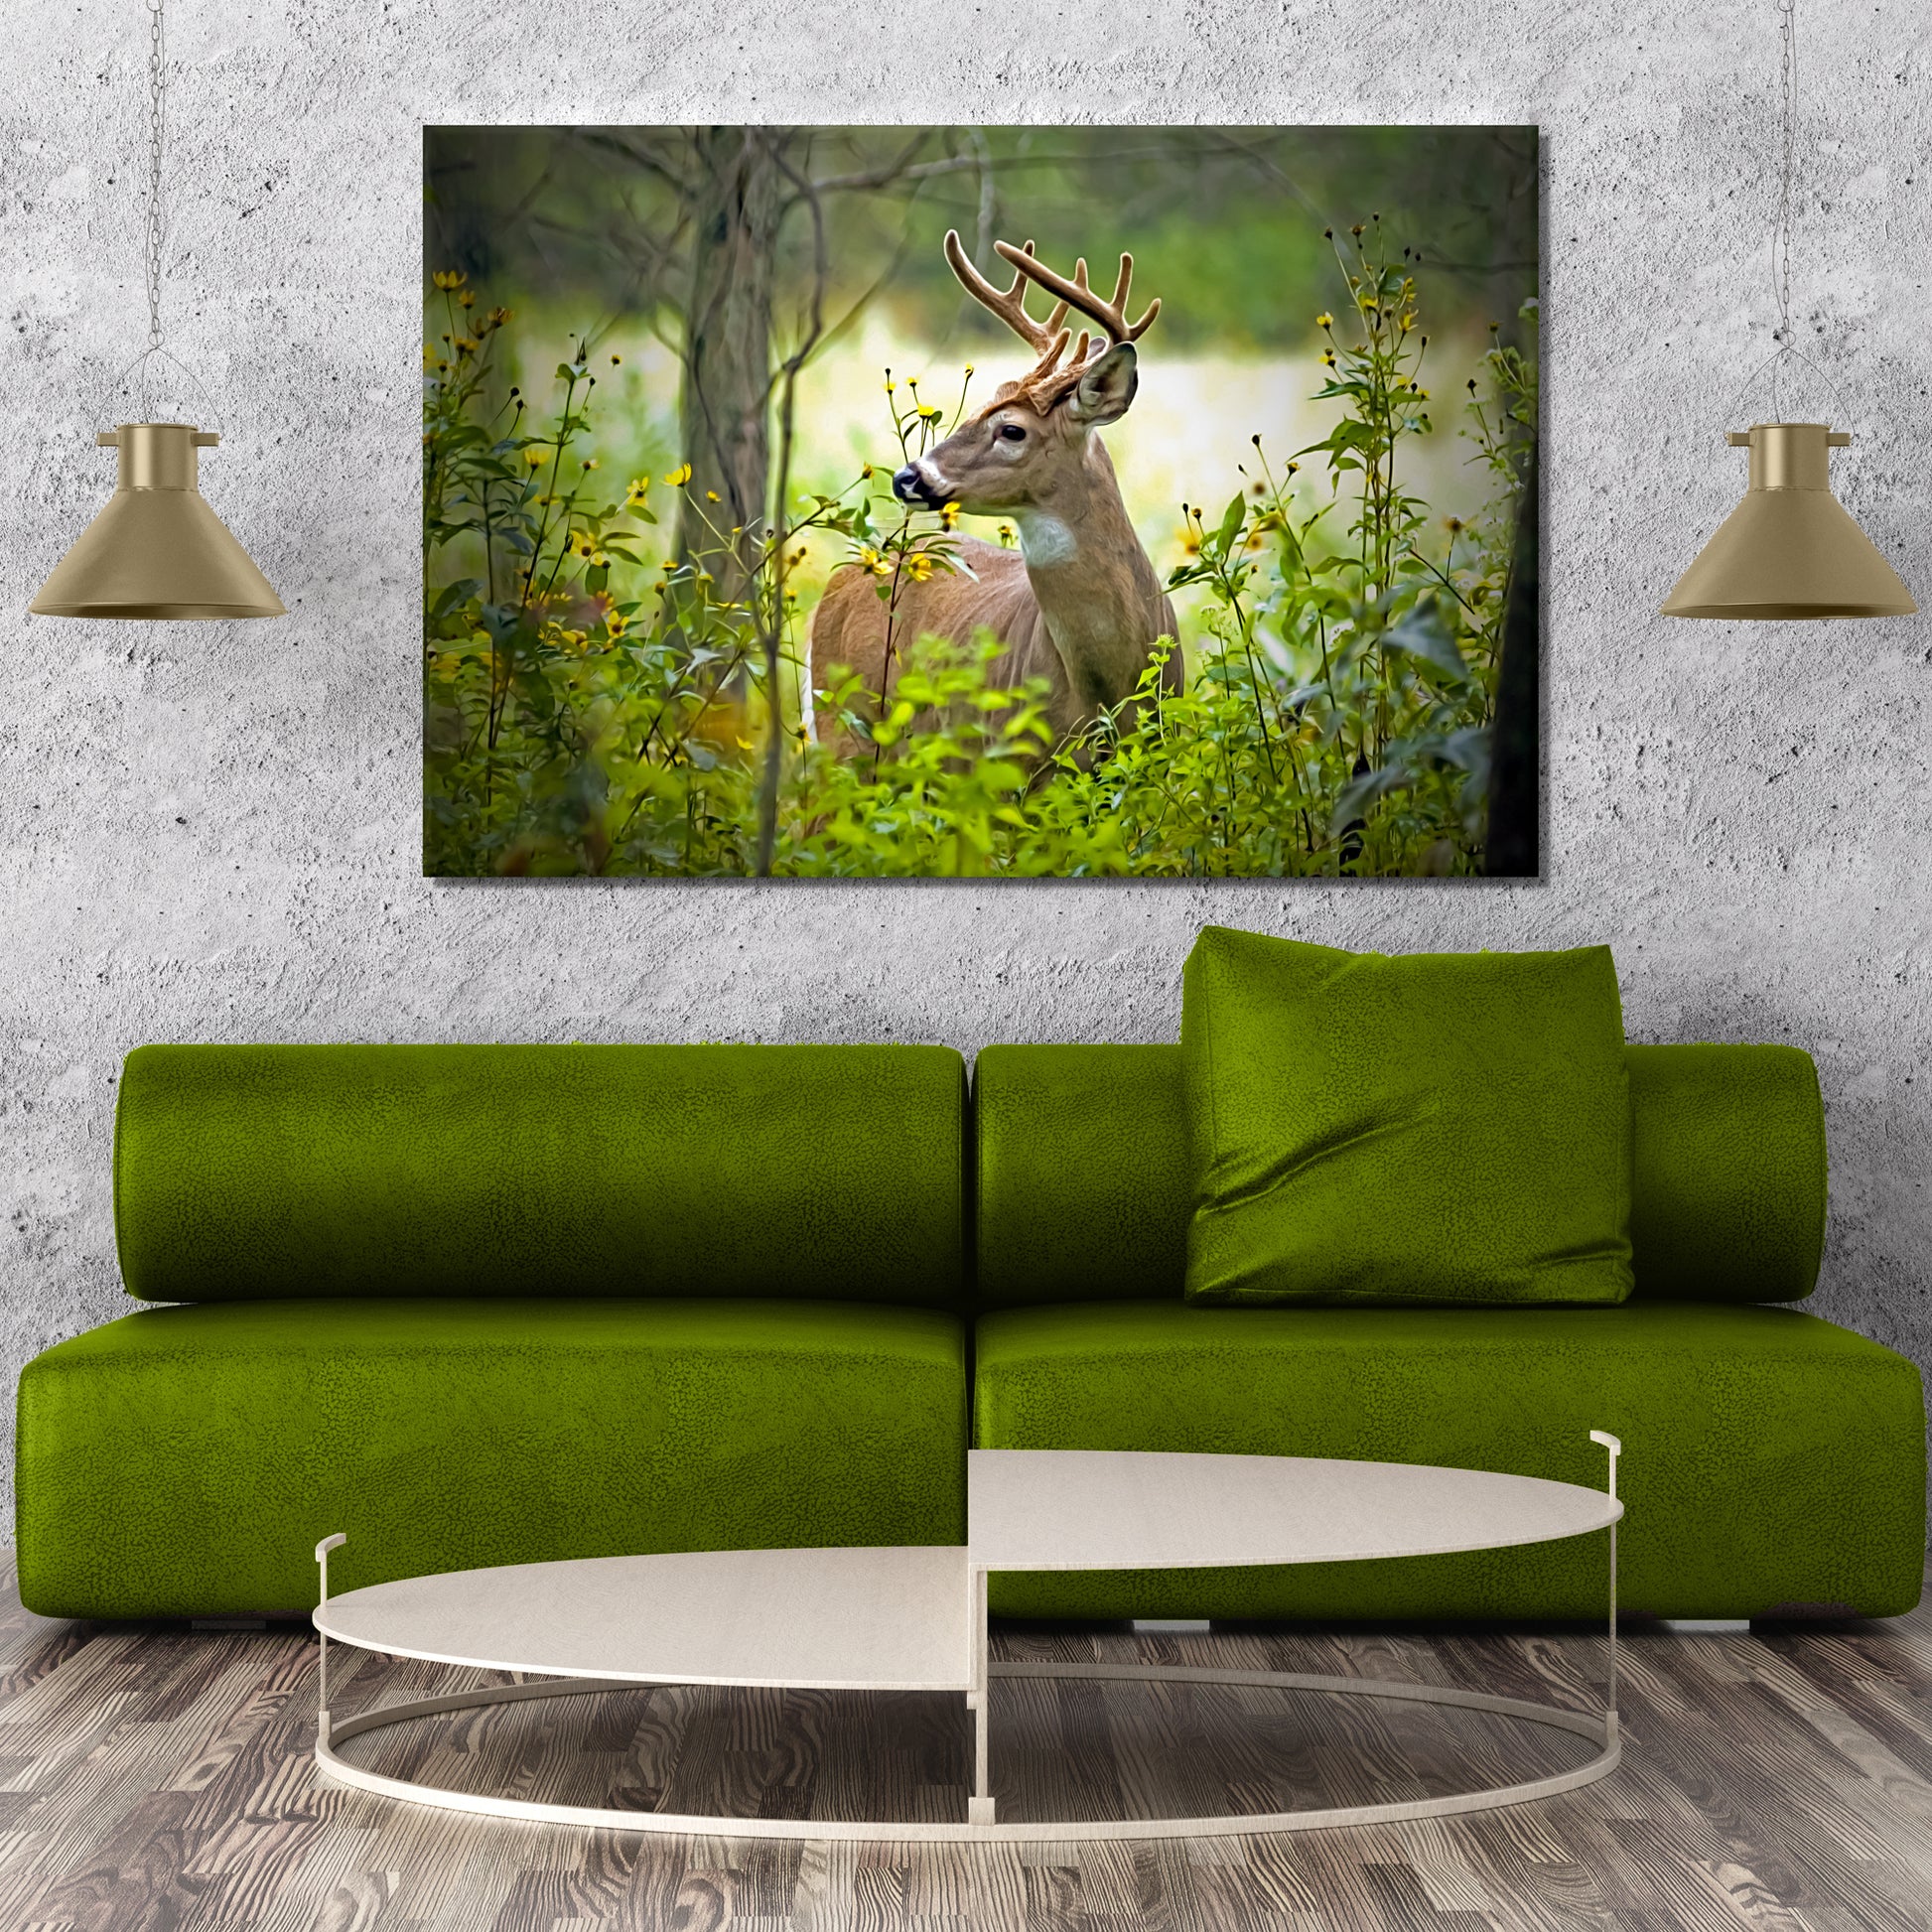 Whitetail Deer In Forest Bushes Canvas Wall Art Style 2 - Image by Tailored Canvases